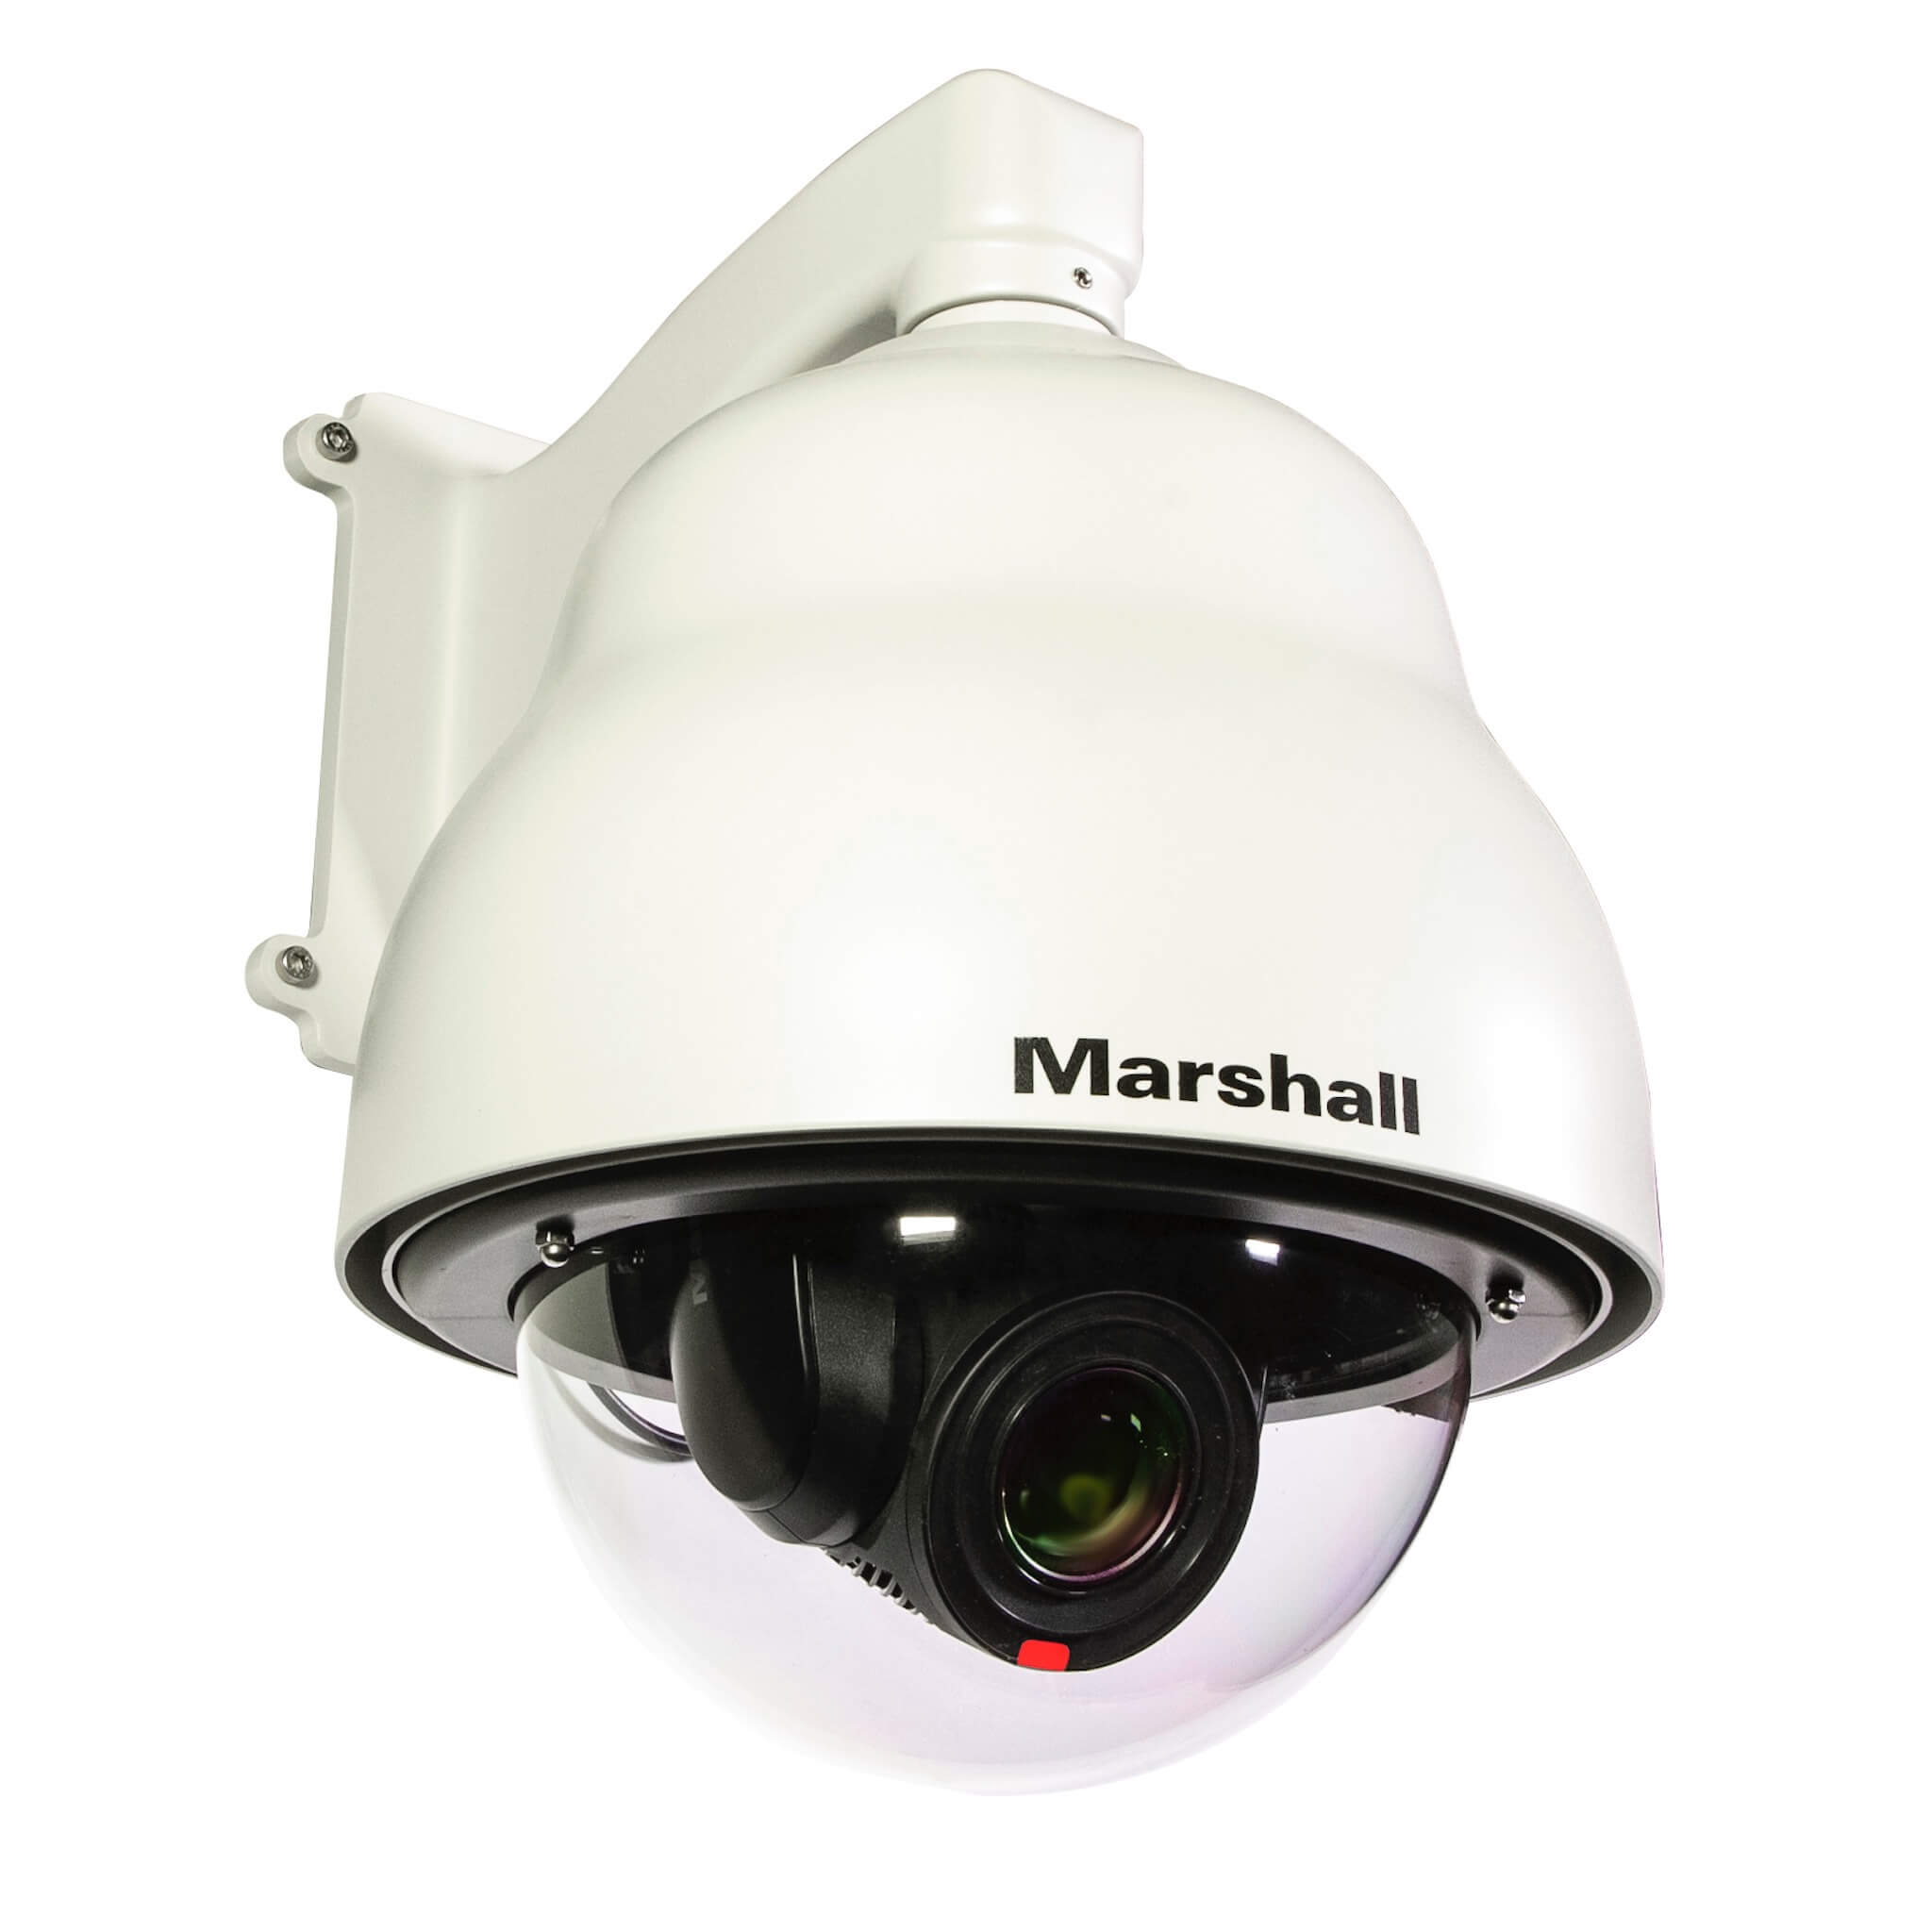 Marshall CV6XX-DH - Outdoor Dome Housing for PTZ Cameras, angle